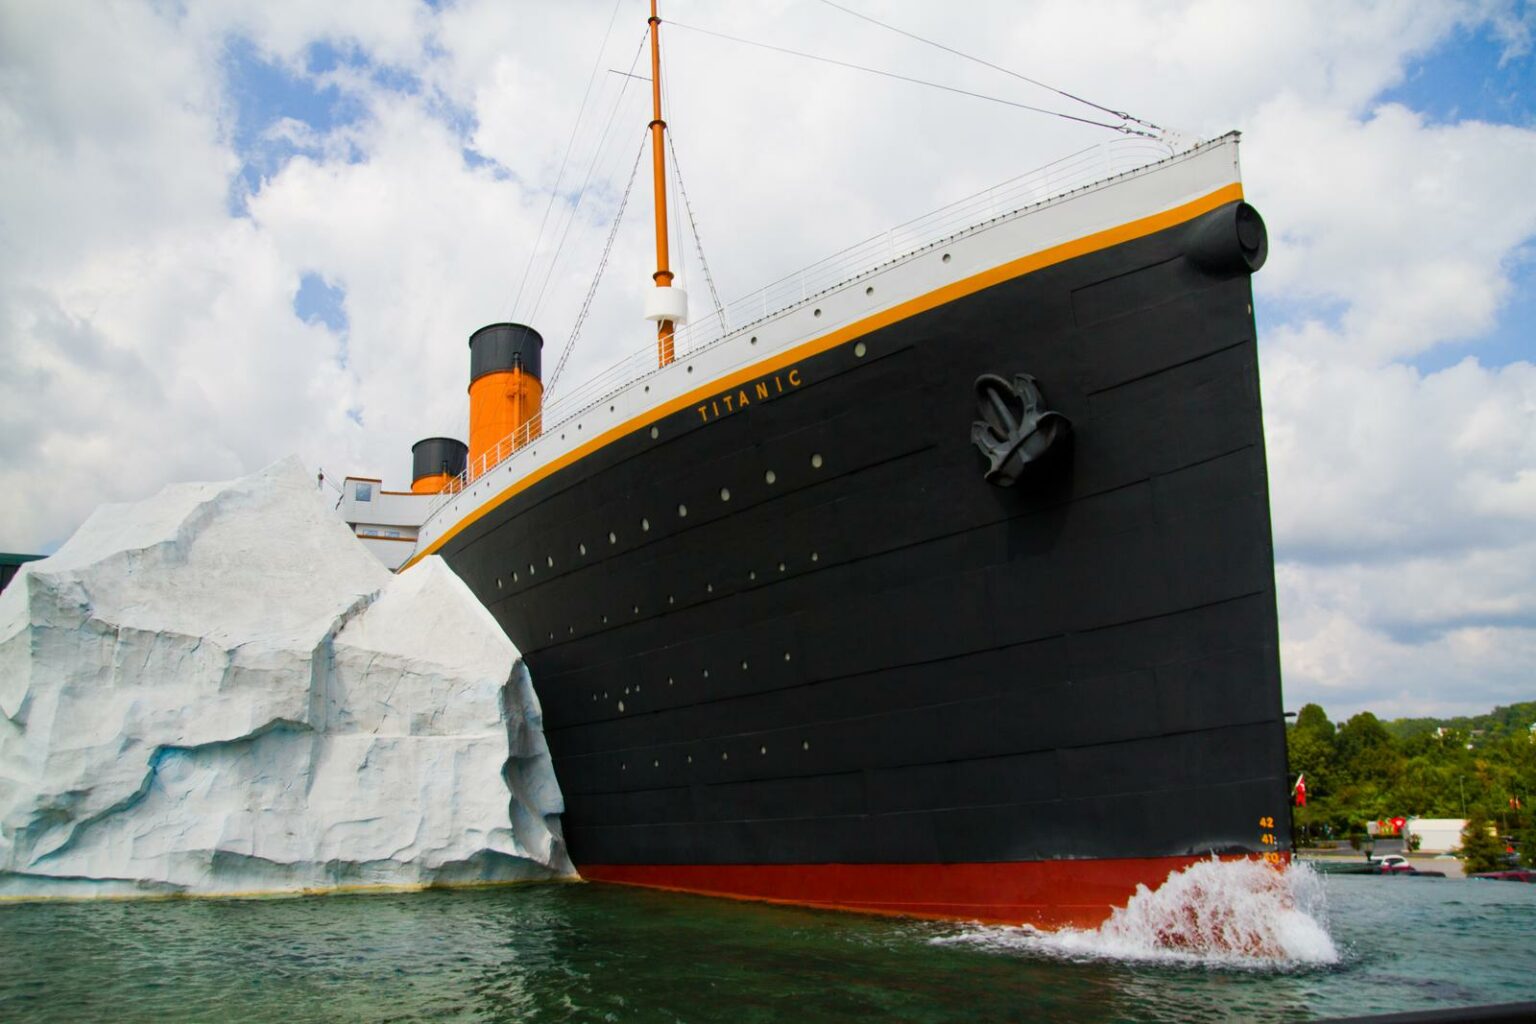 Can You Visit The Titanic? Go Every Corner!